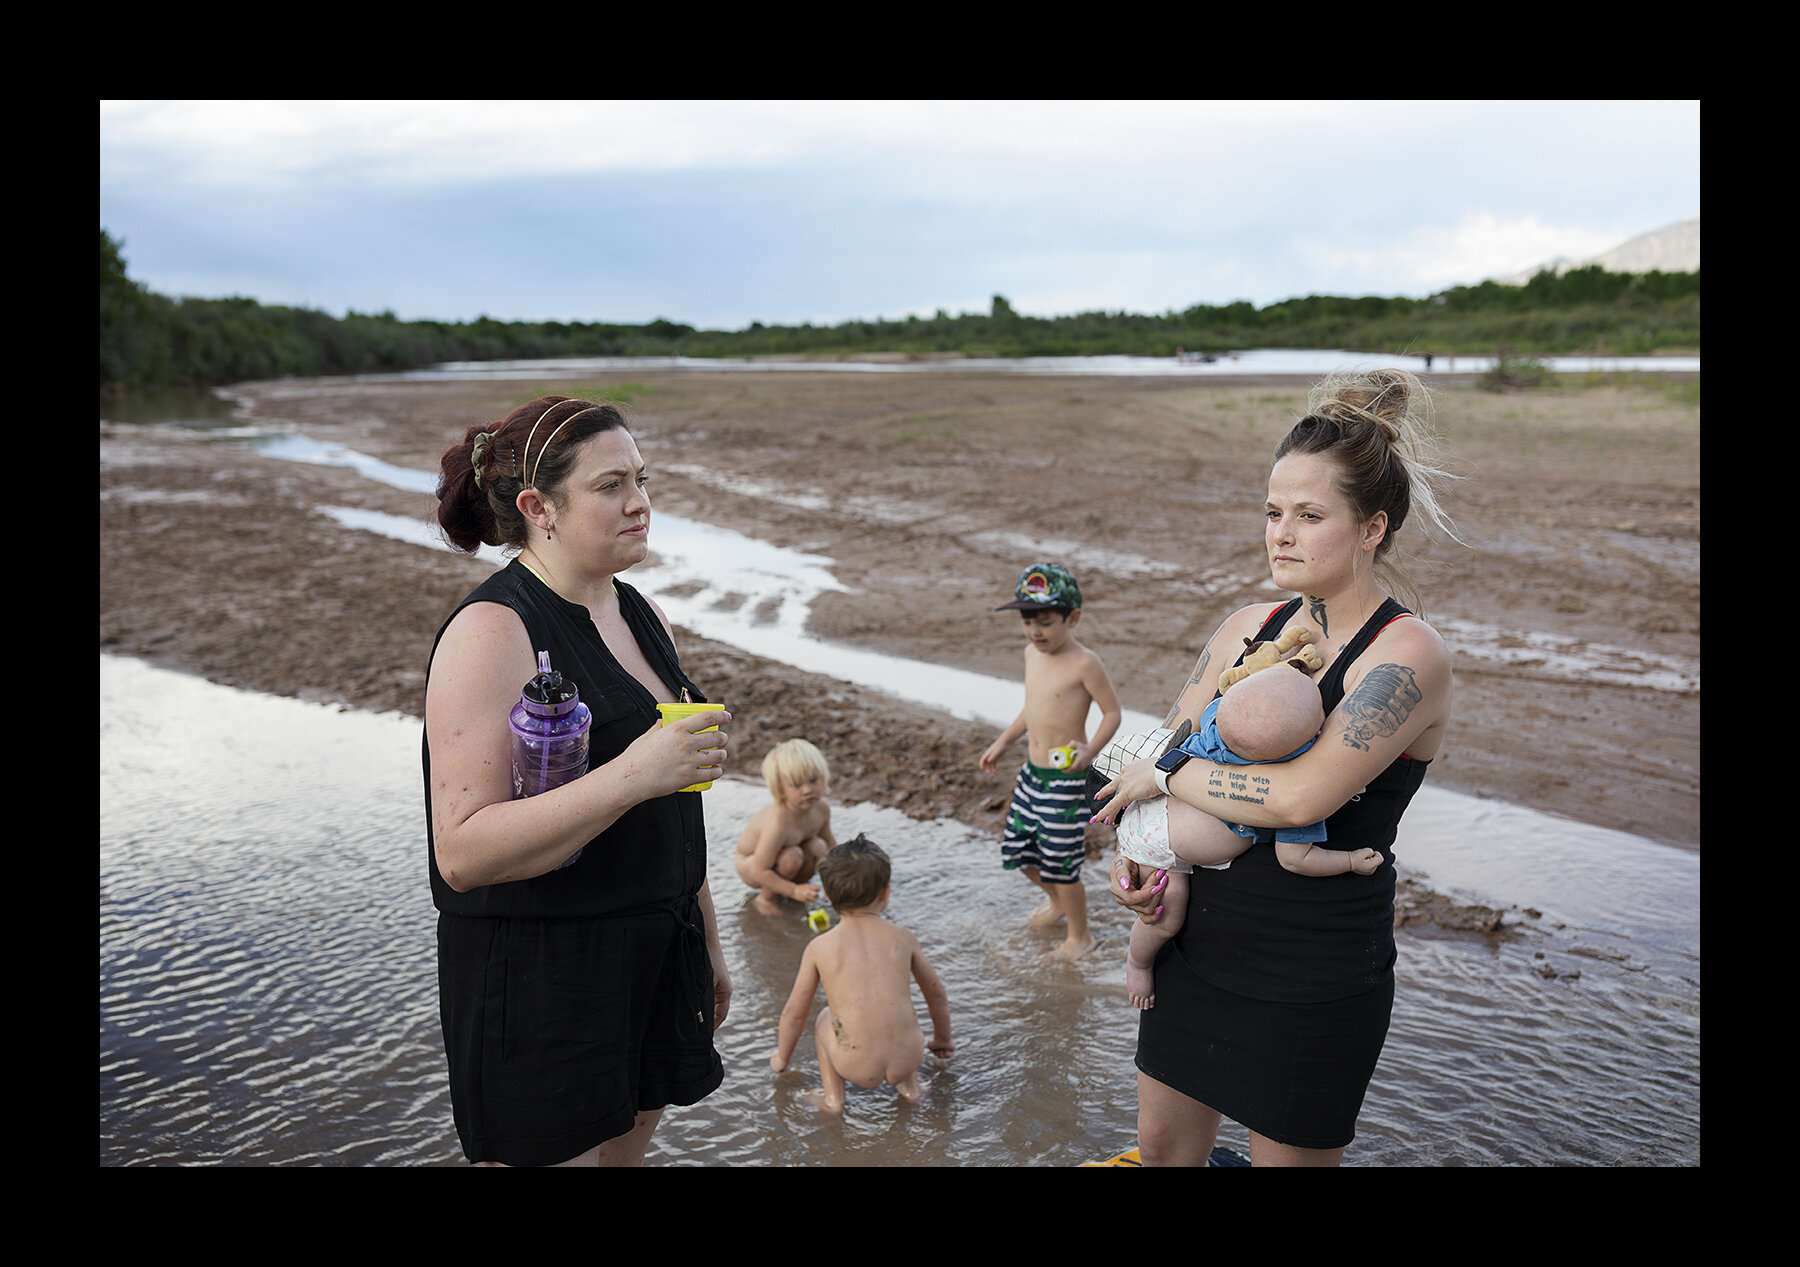  Emma Bordegaray, 28, and Mariah Kennedy, 28, hanging out with their families on the Rio Grande River in Albuquerque, New Mexico. 